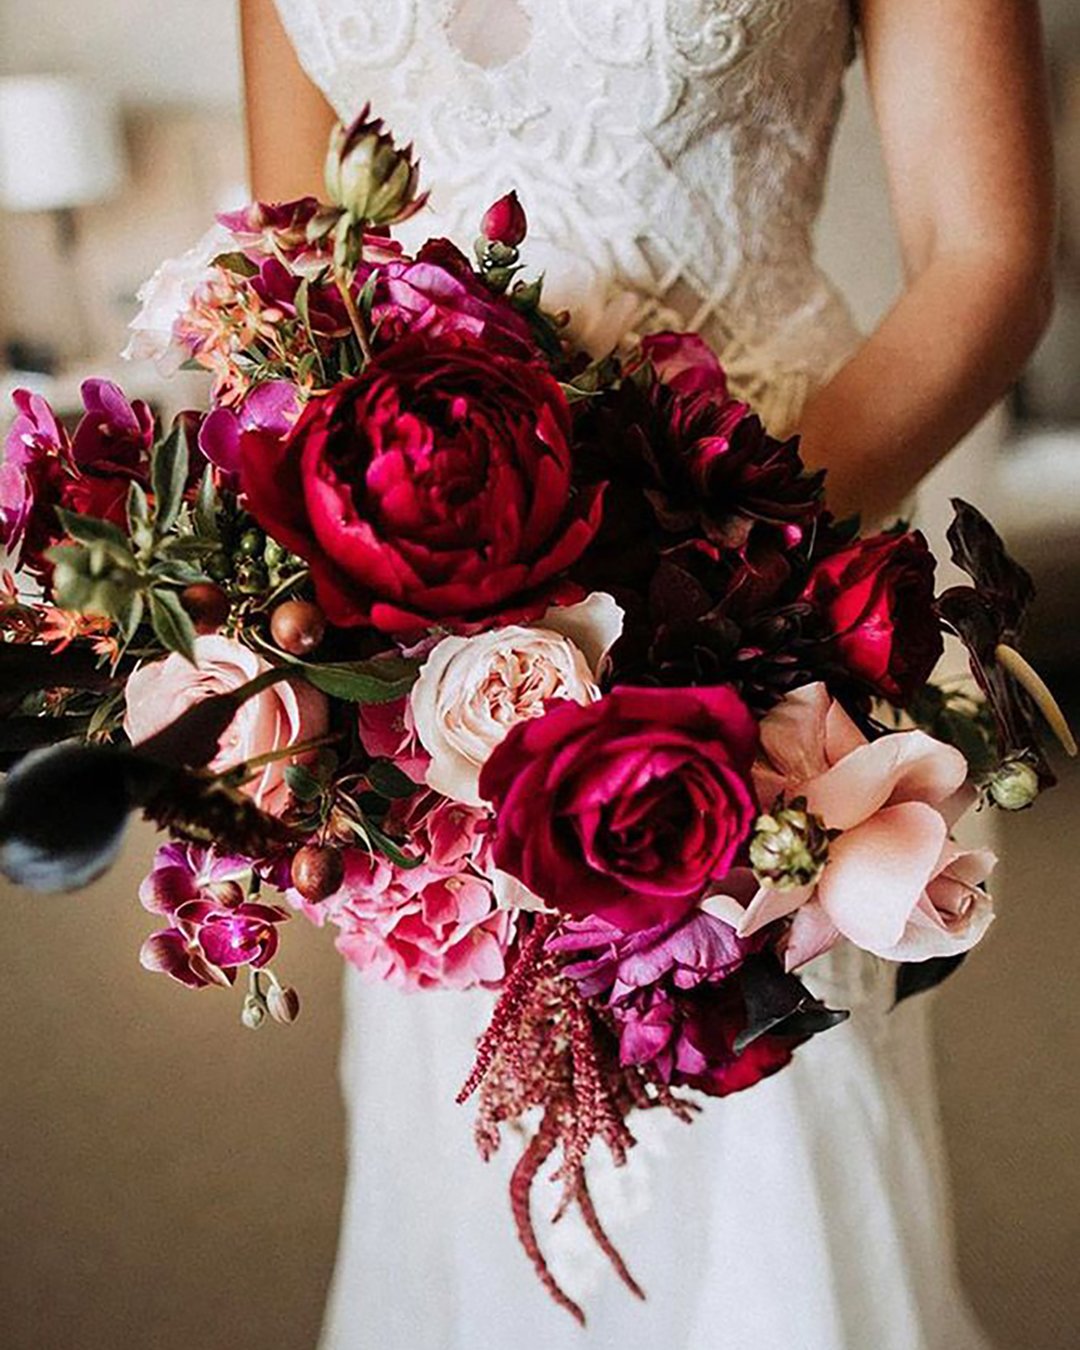 wedding bouquet ideas with burgundy roses and orchids natasjakremers via instagram